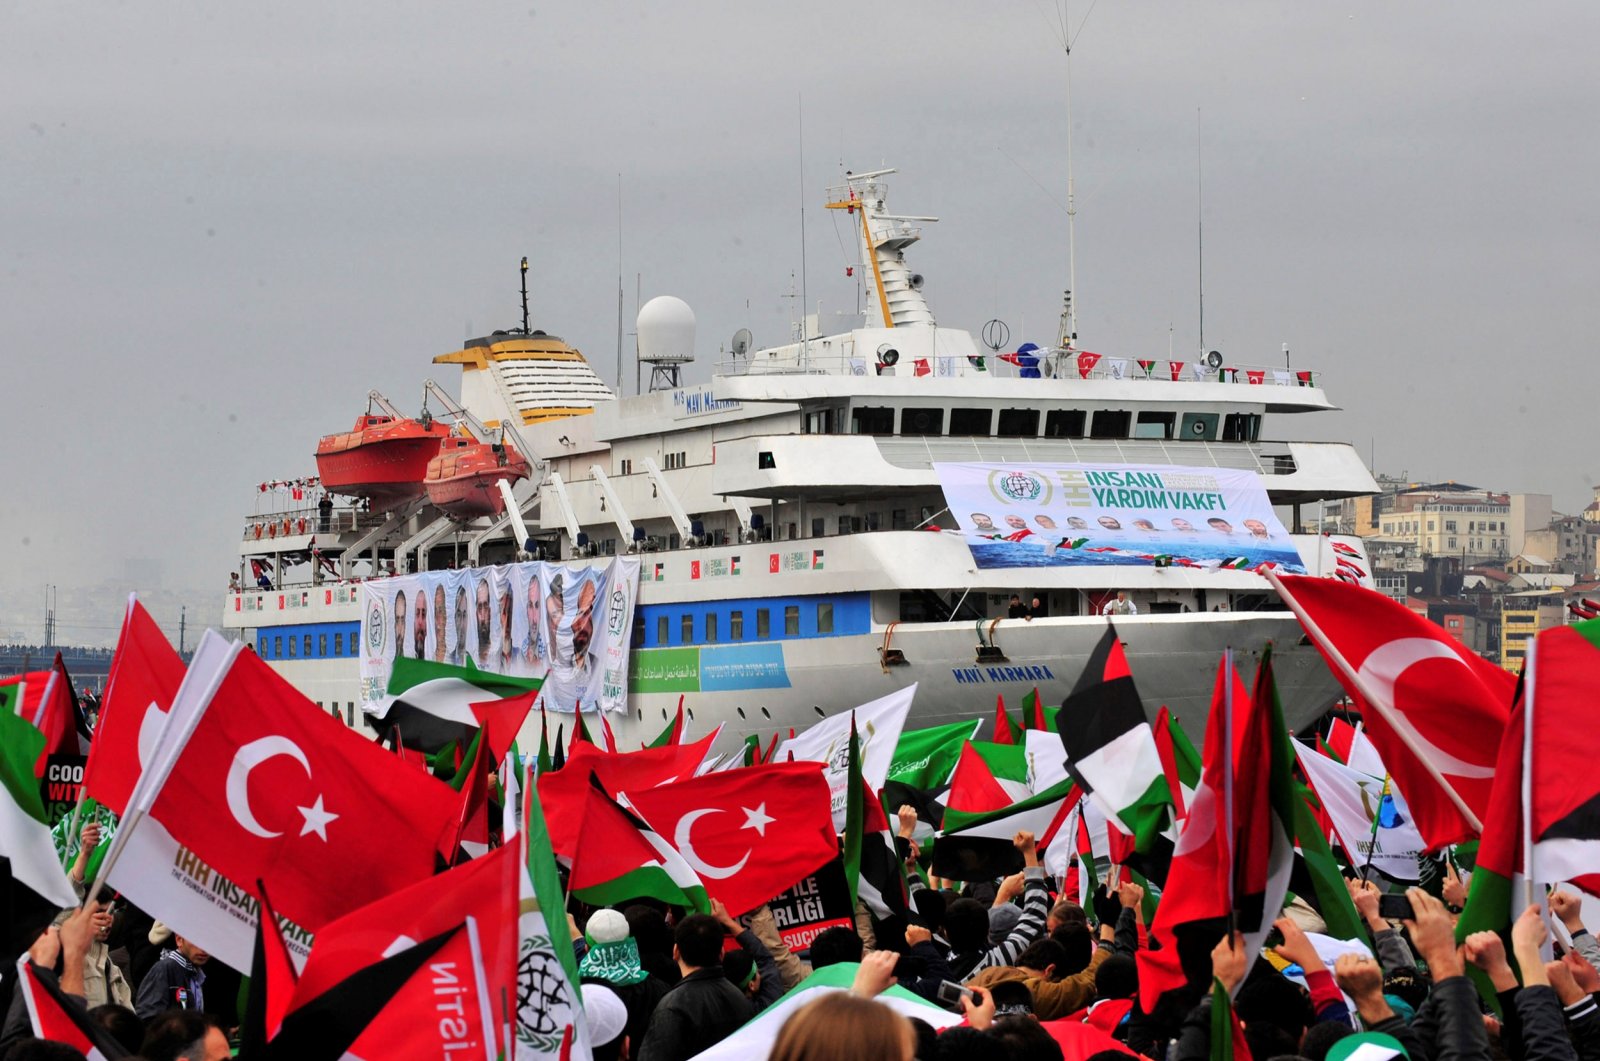 Pro-Palestinian activists wave Turkish and Palestinian flags during the welcoming ceremony for cruise liner Mavi Marmara at the Sarayburnu port of Istanbul, Türkiye, Dec. 26, 2010. (Reuters File Photo)